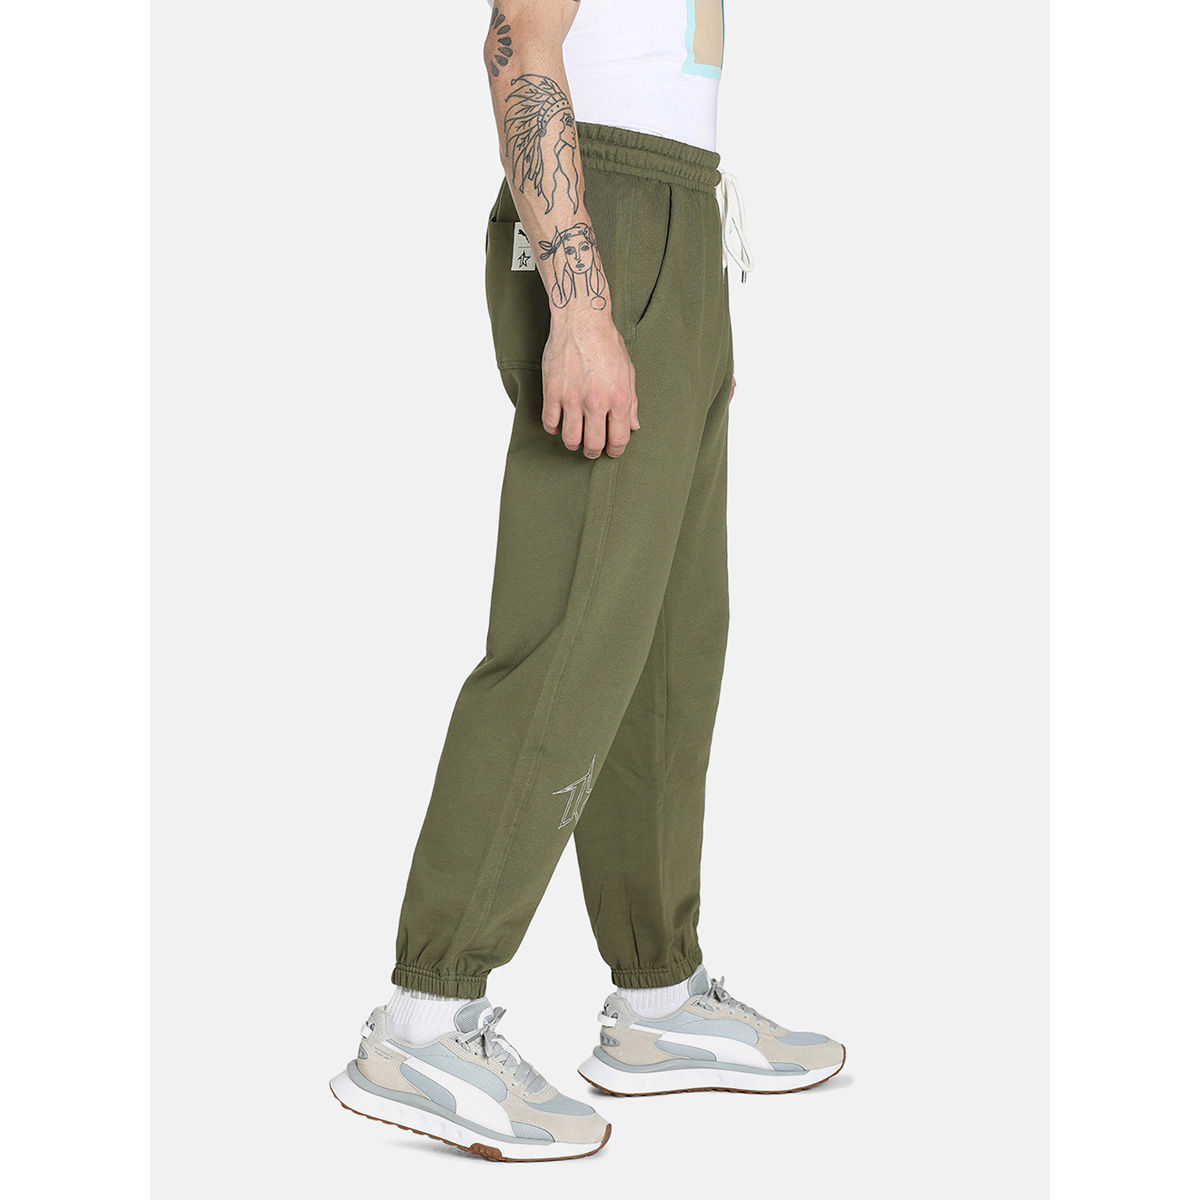 Grey Relaxed Trousers - Buy Grey Relaxed Trousers online in India